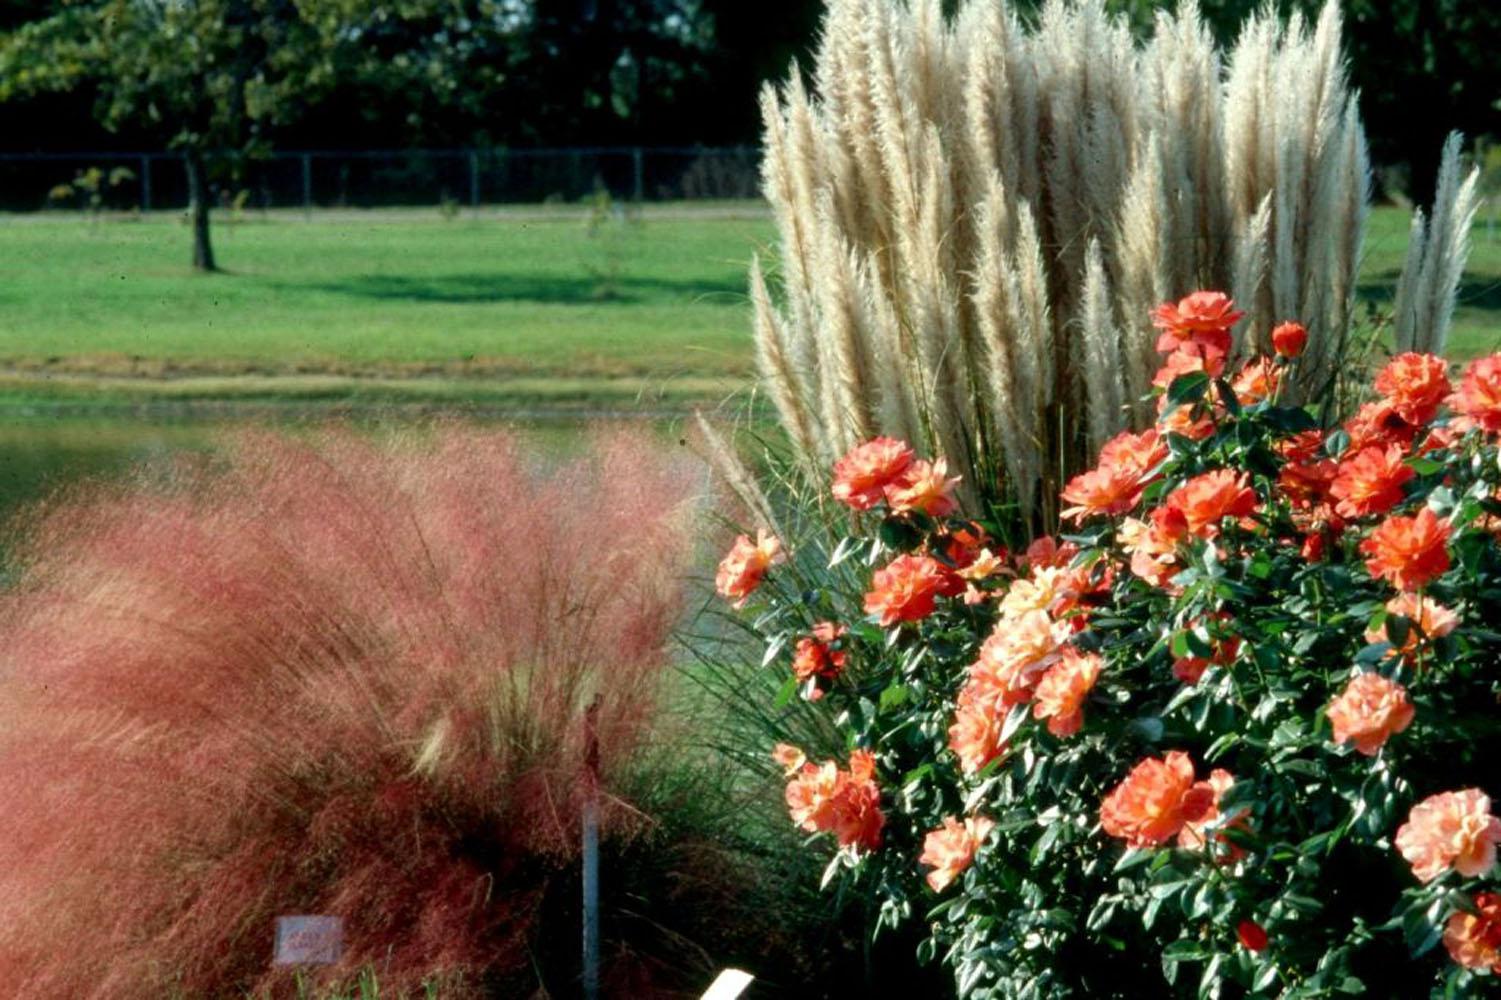 Visitors to the Fall Flower and Garden Fest can expect to find a variety of flowers and ornamental grasses, like the muhly grass and dwarf pampas shown here.